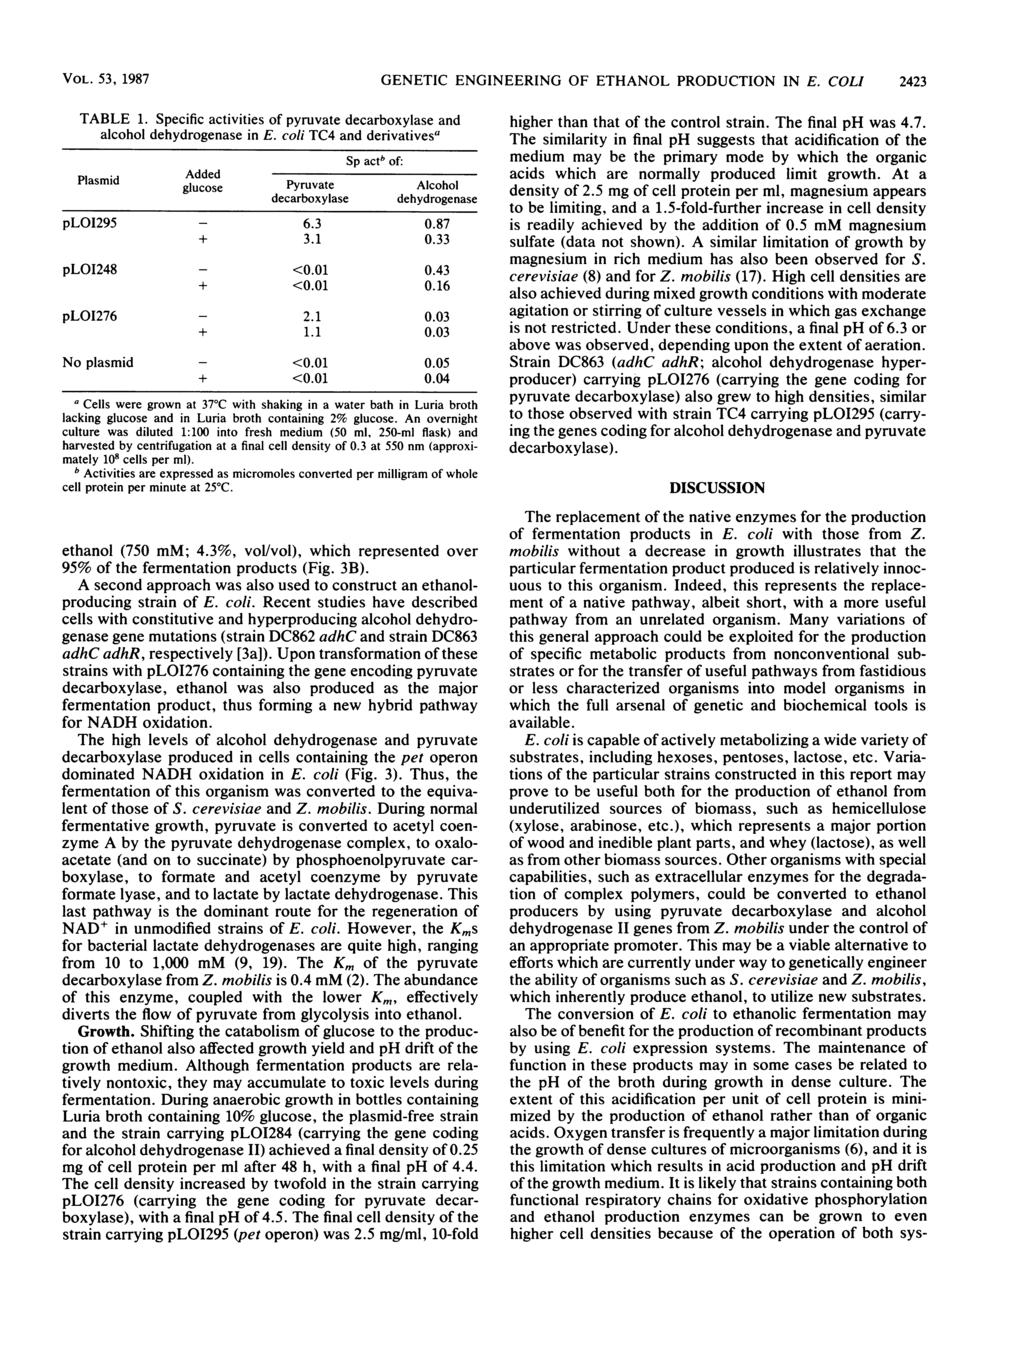 VOL. 53, 1987 GENETIC ENGINEERING OF ETHANOL PRODUCTION IN E. COLI 2423 TABLE 1. Specific activities of pyruvate decarboxylase and alcohol dehydrogenase in E.